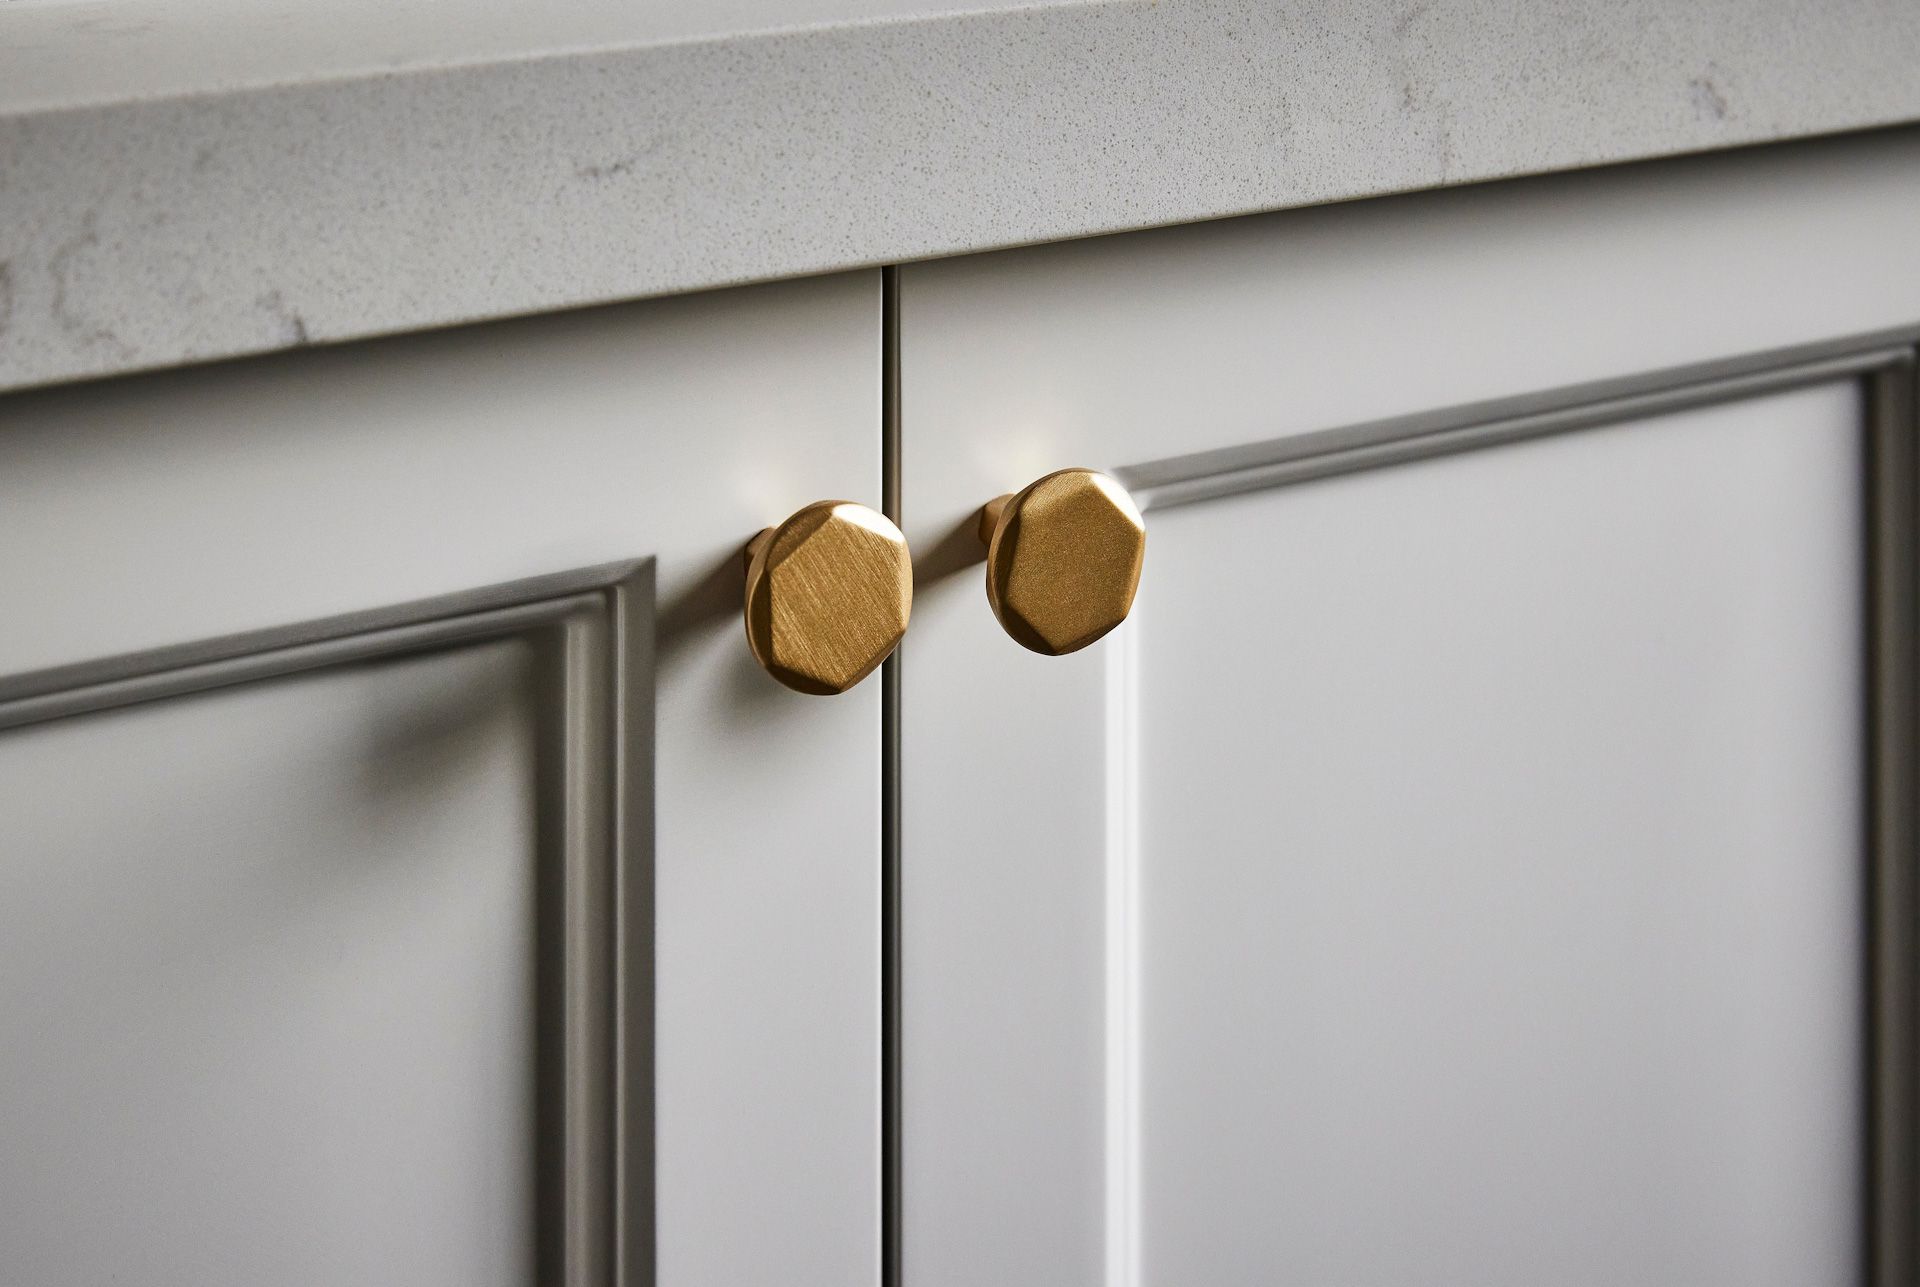 A pair of brass cabinet knobs on a white cabinet